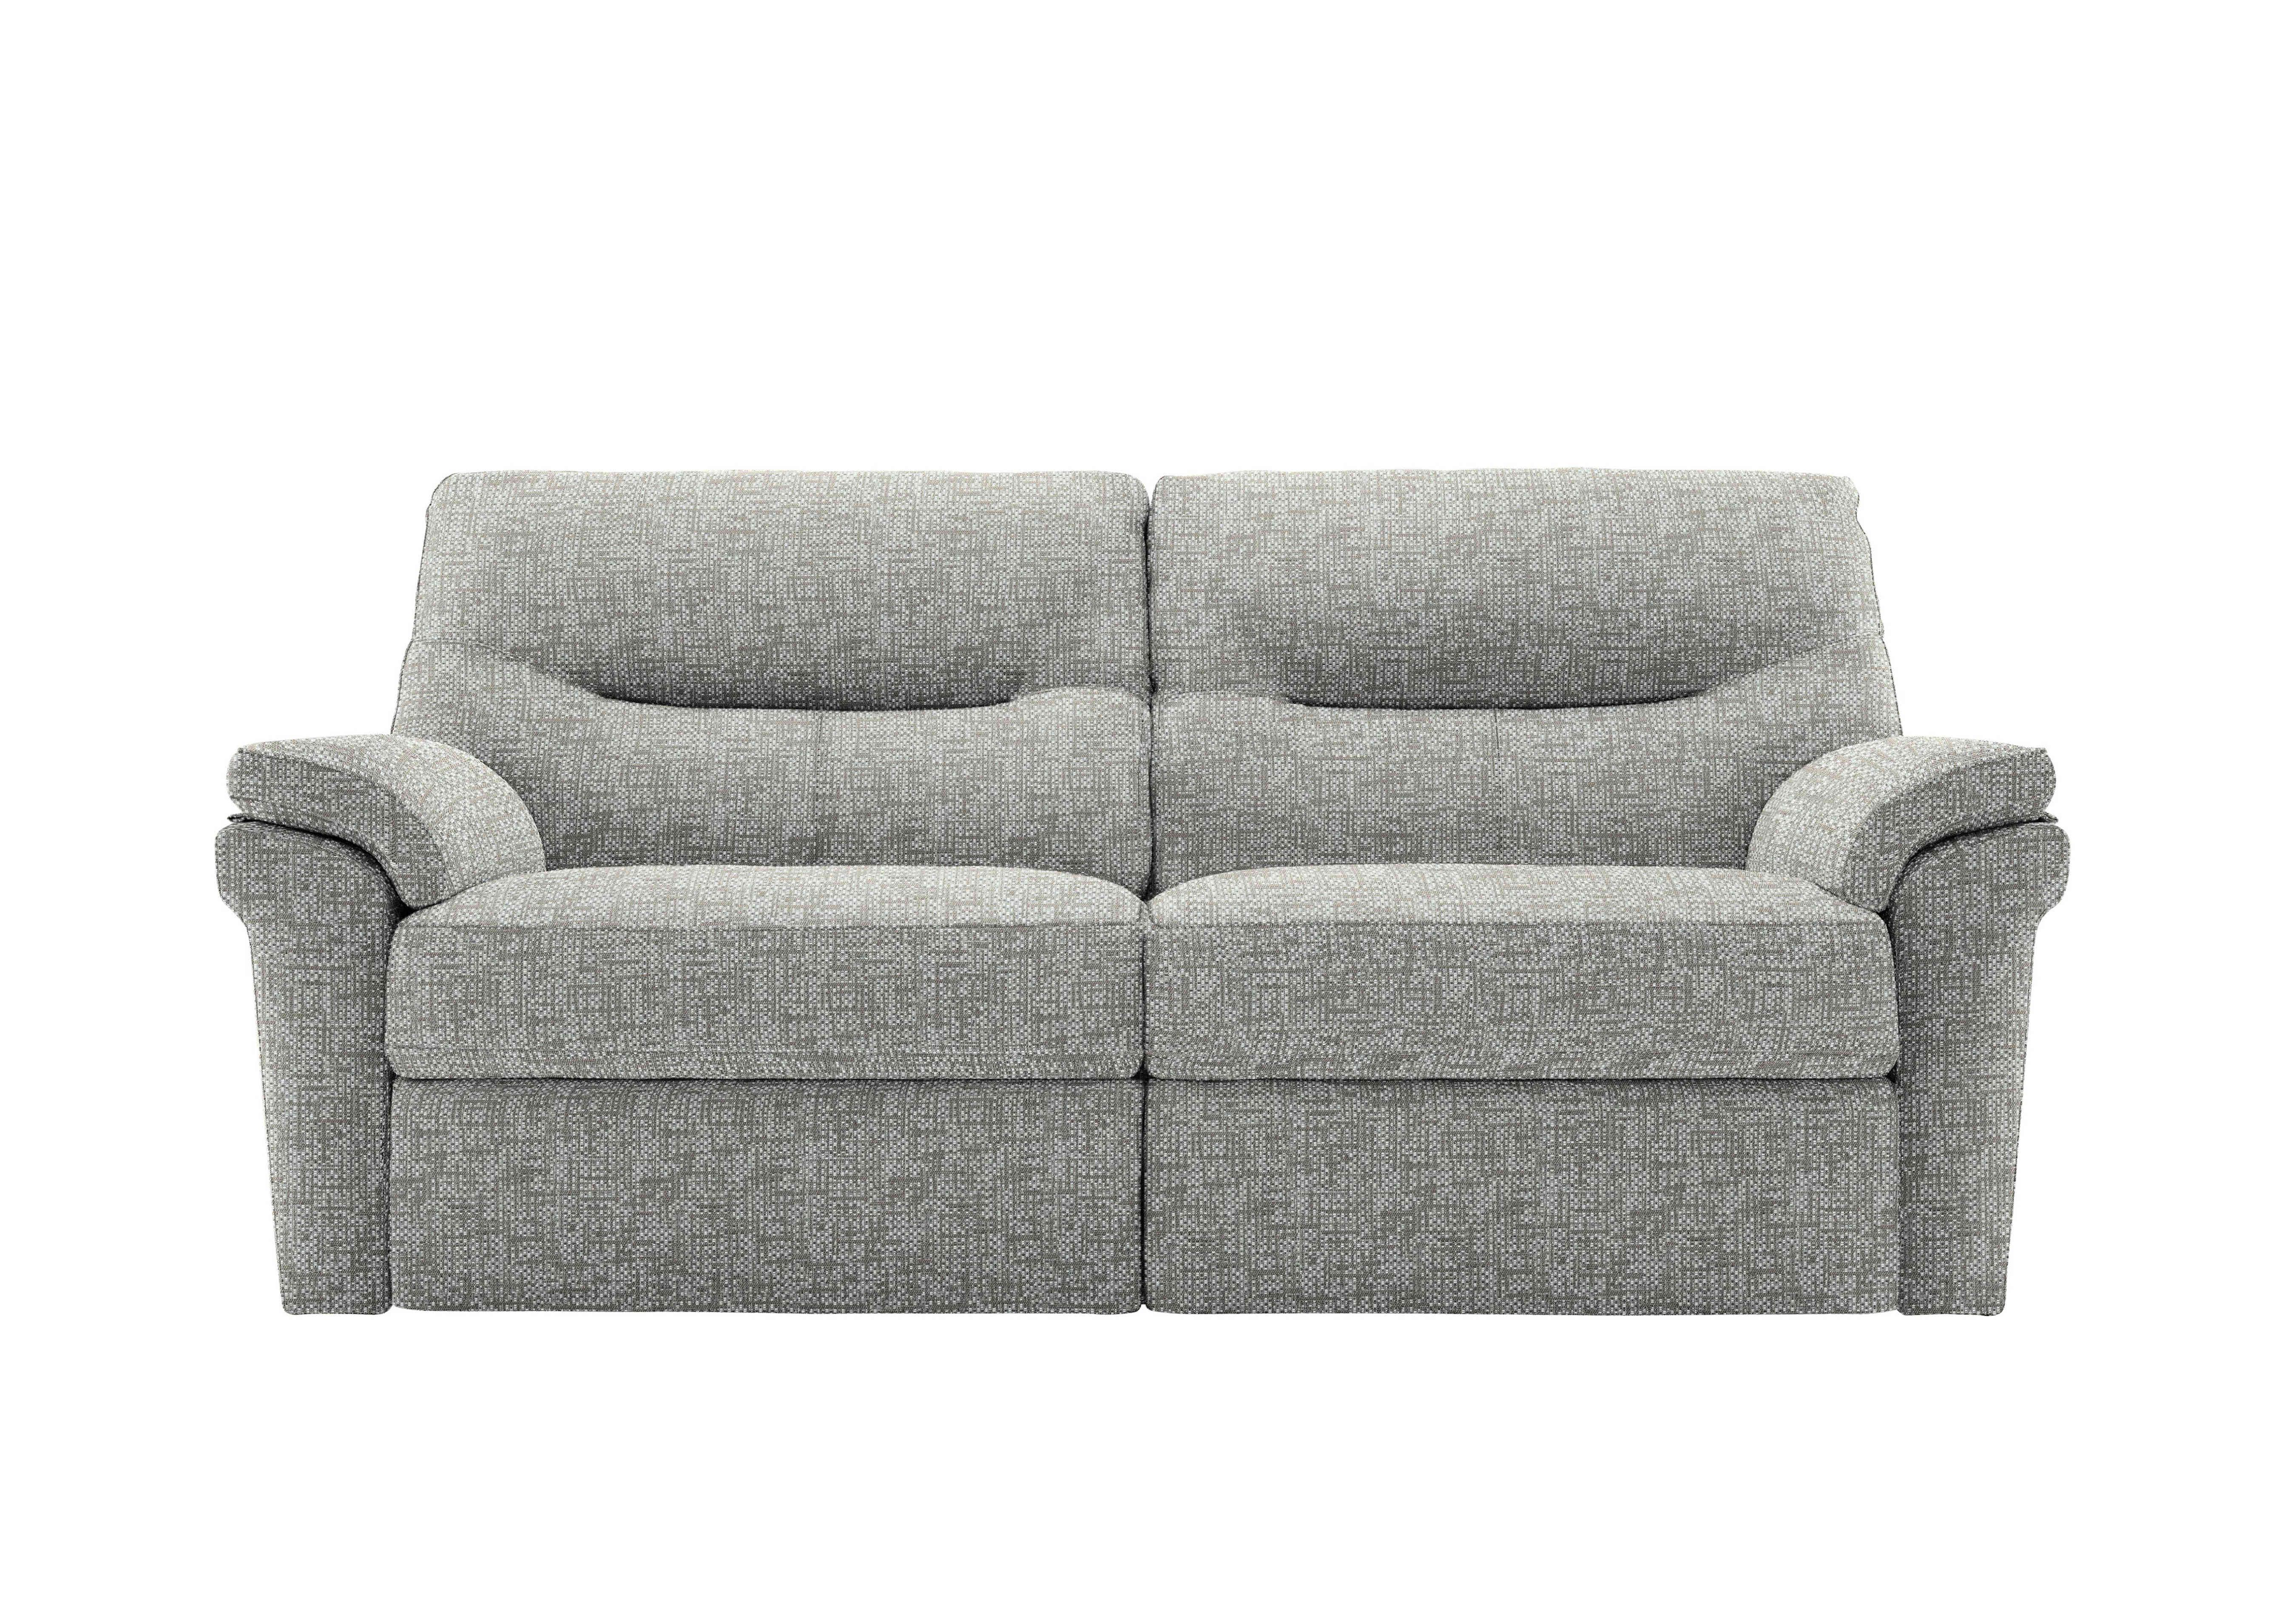 Seattle 3 Seater Fabric Sofa in B032 Remco Duck Egg on Furniture Village